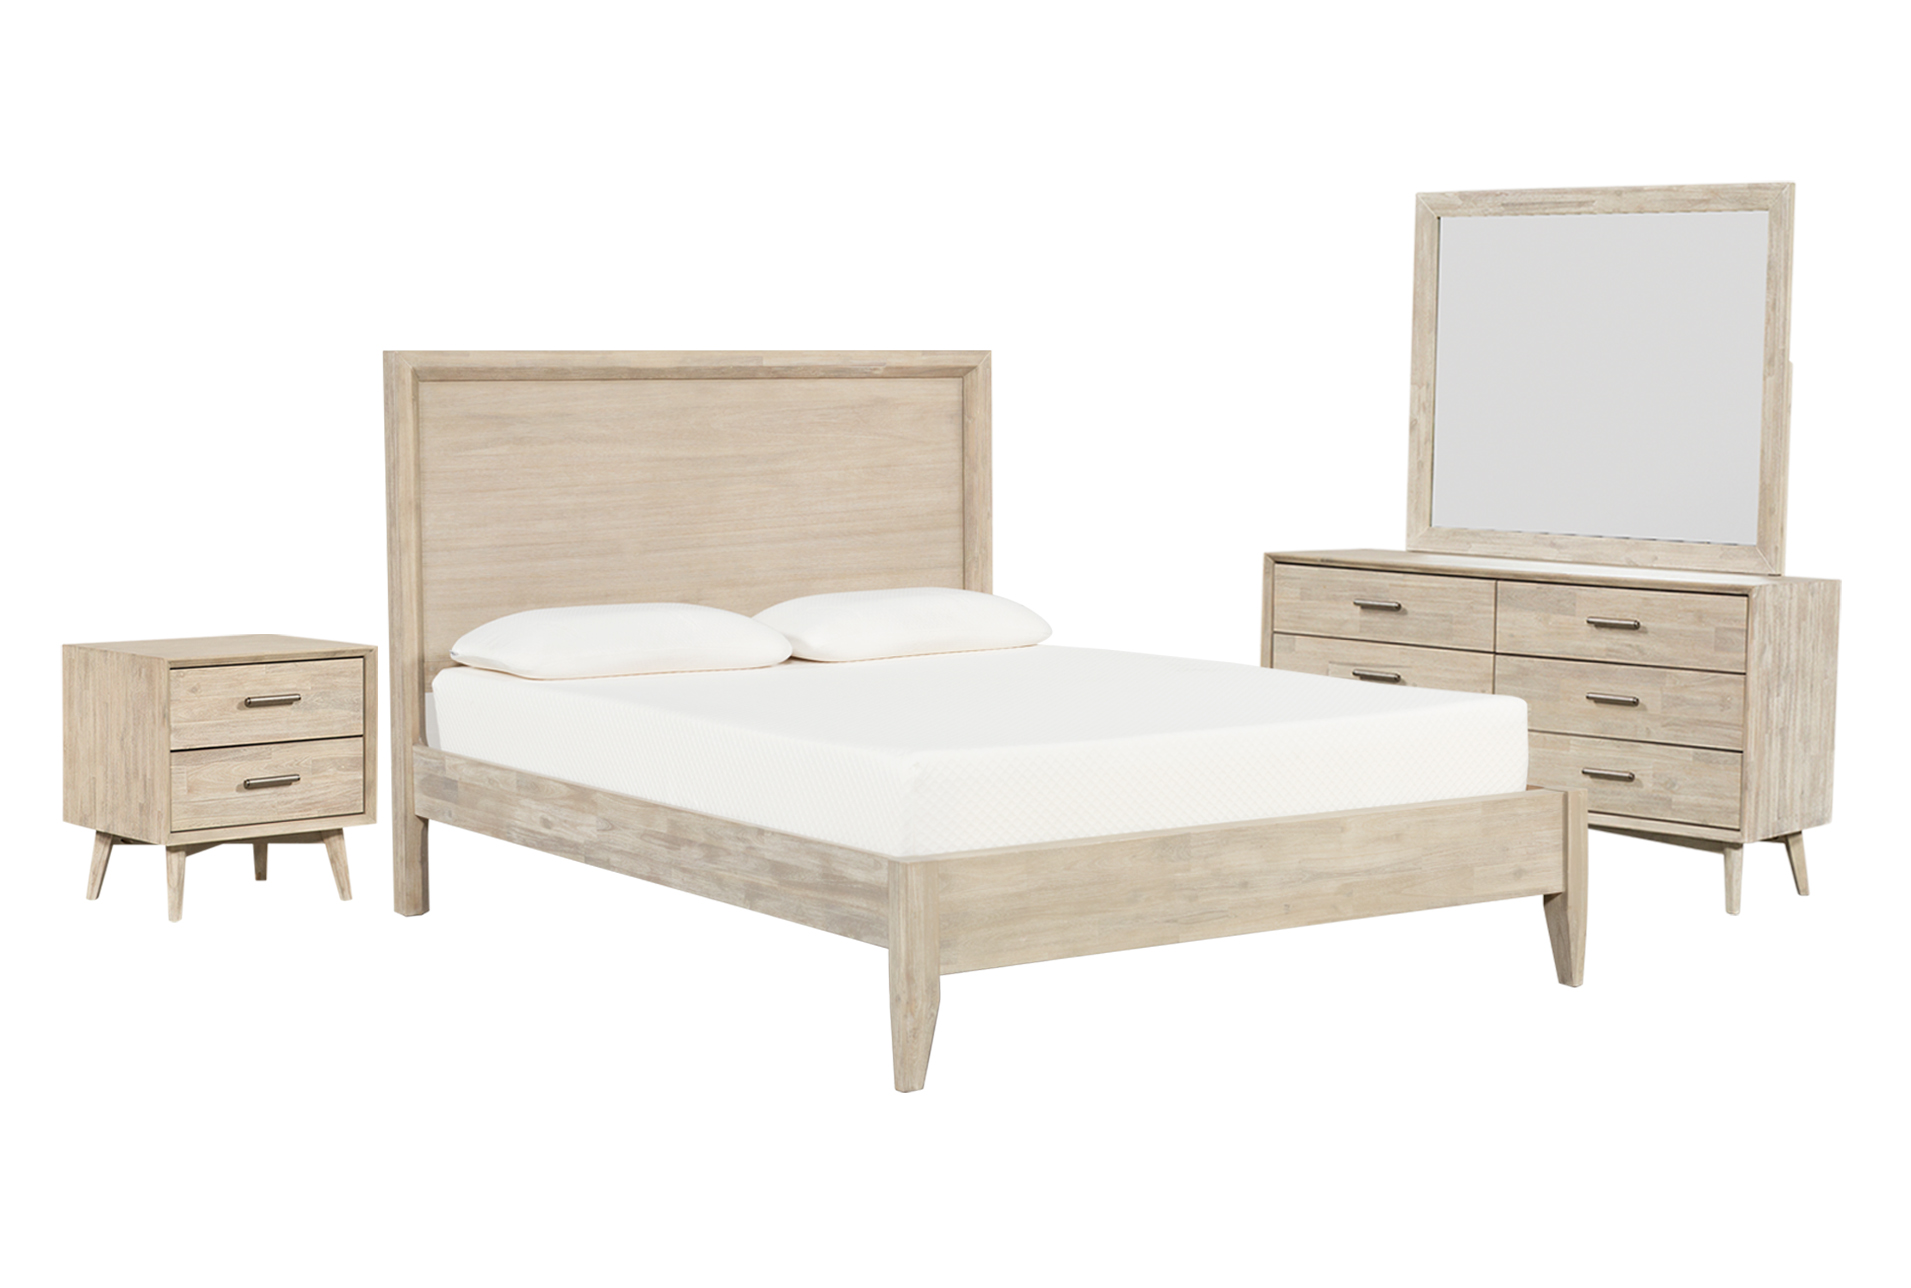 california king beds by strick and bolton vilas